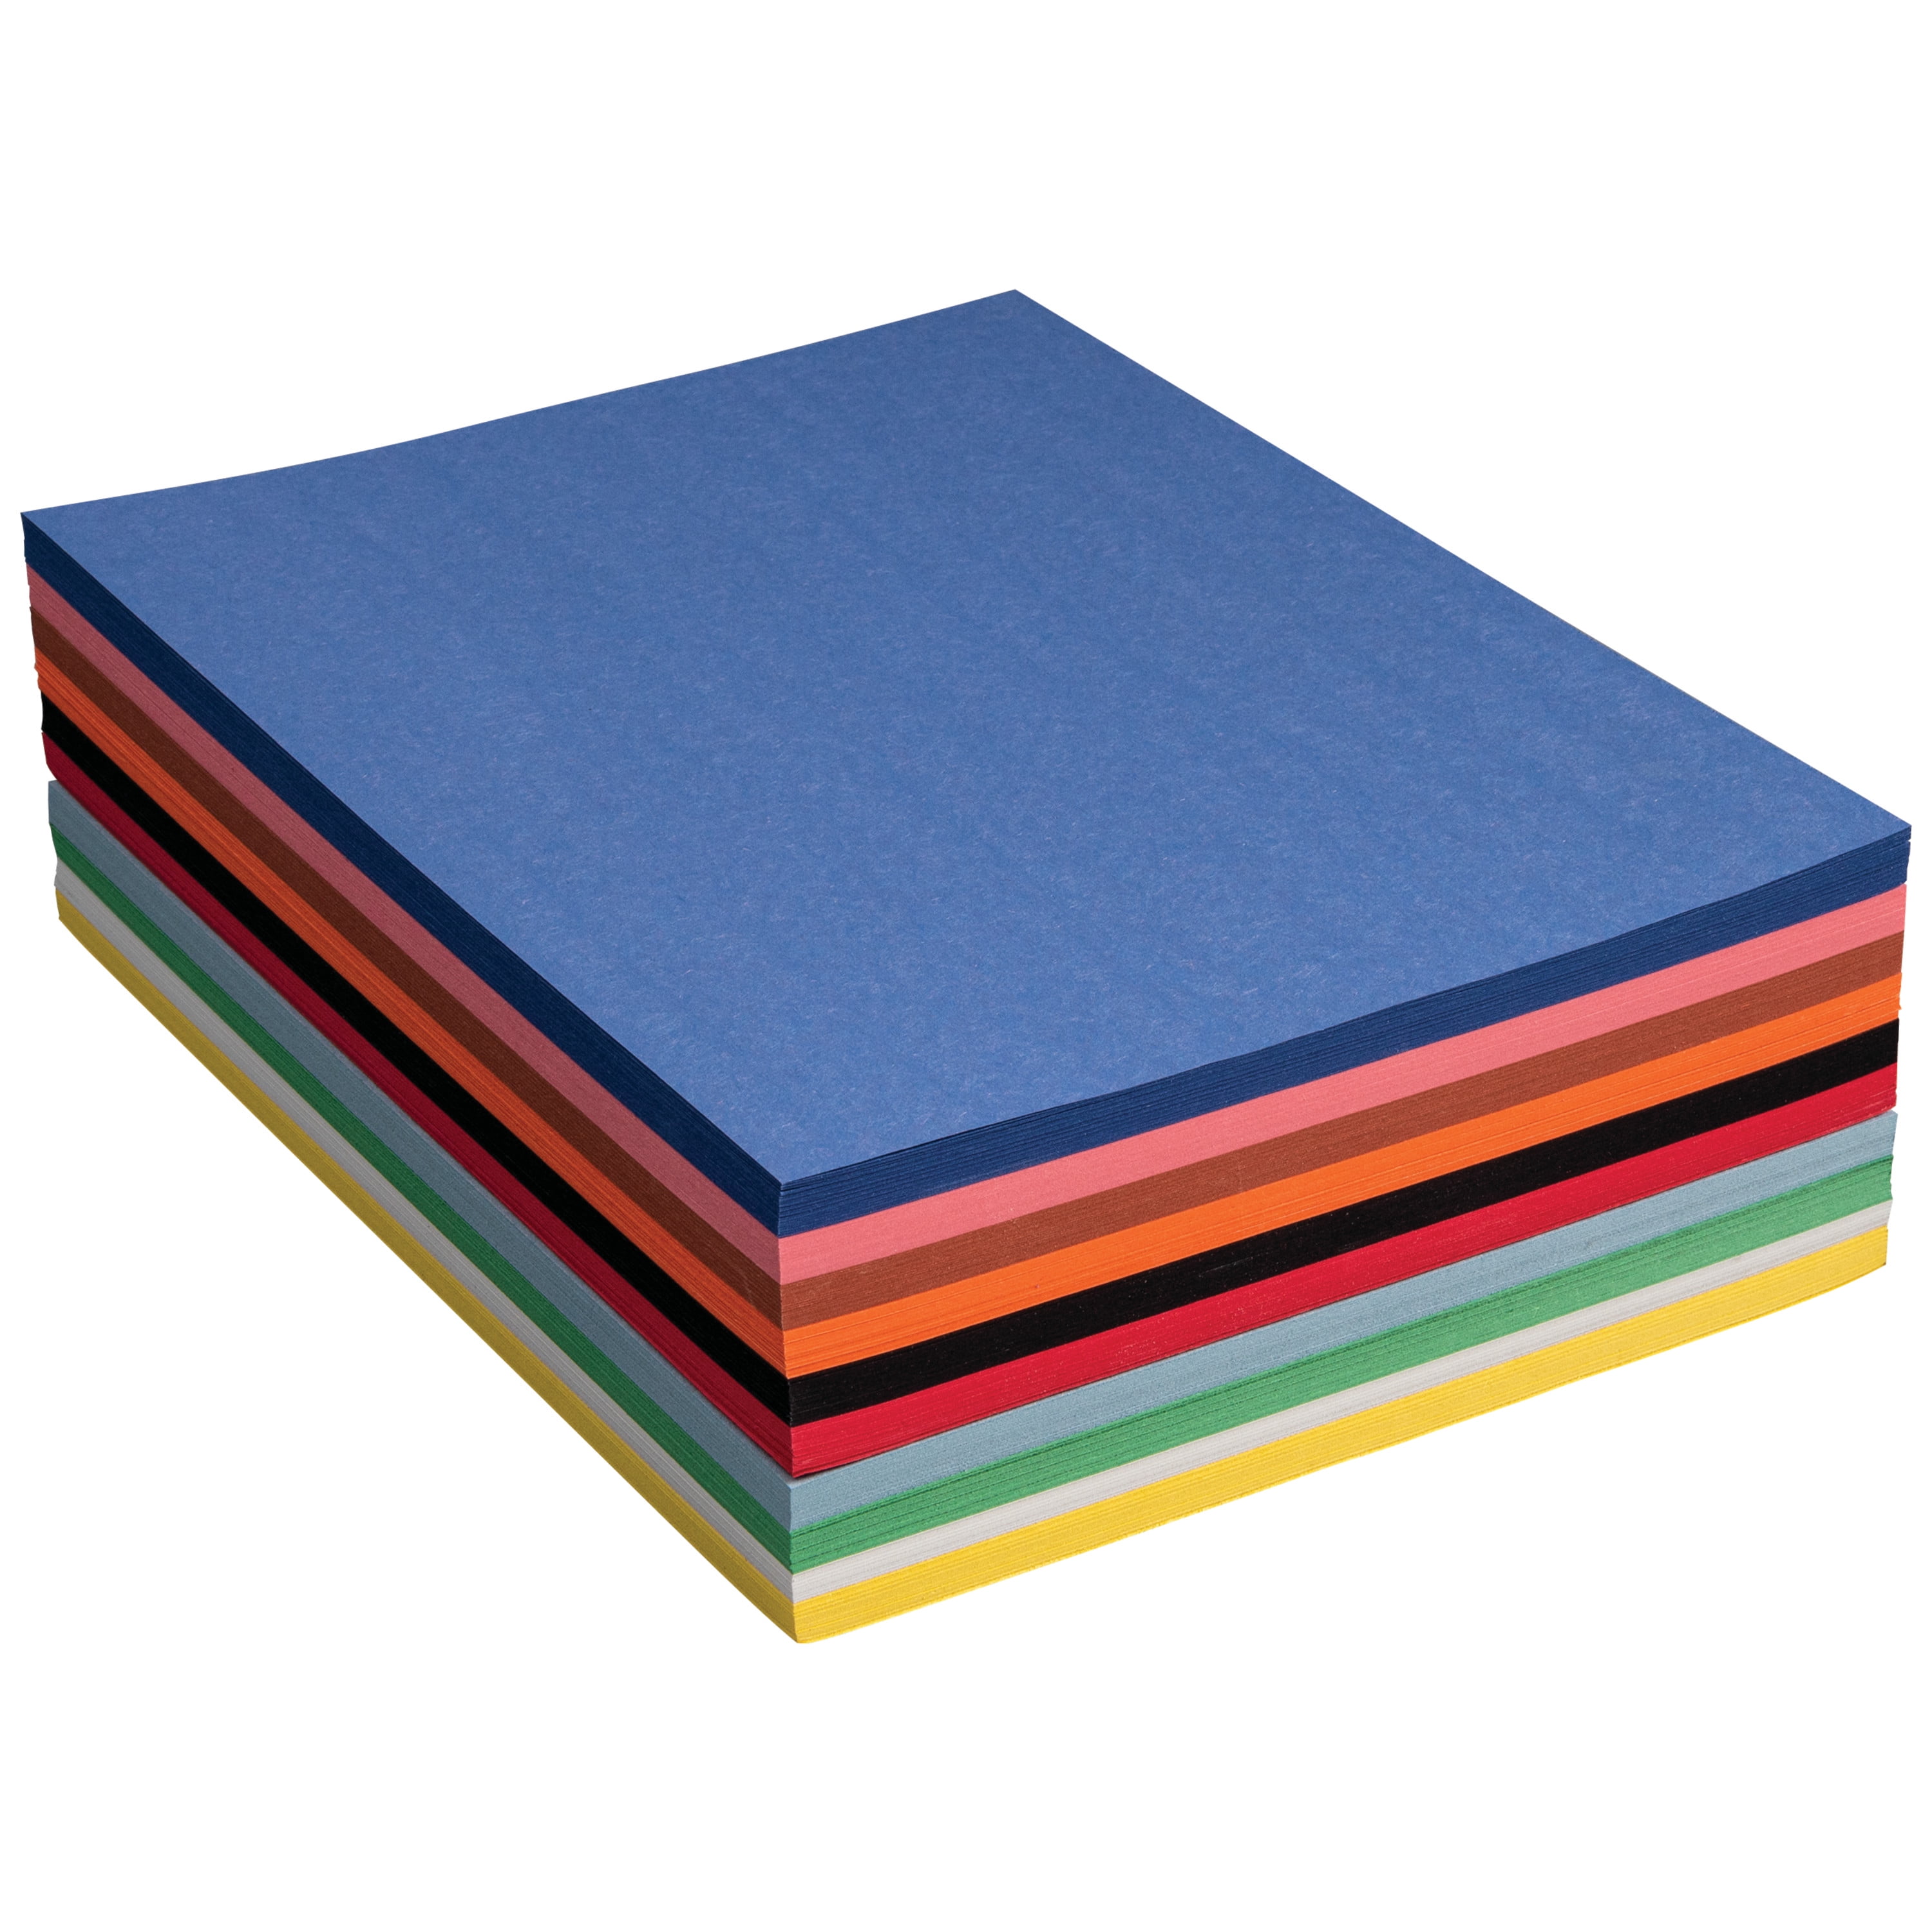 3000 Sheets Construction Paper Bulk 11.4 X 7.9 Inch Colored